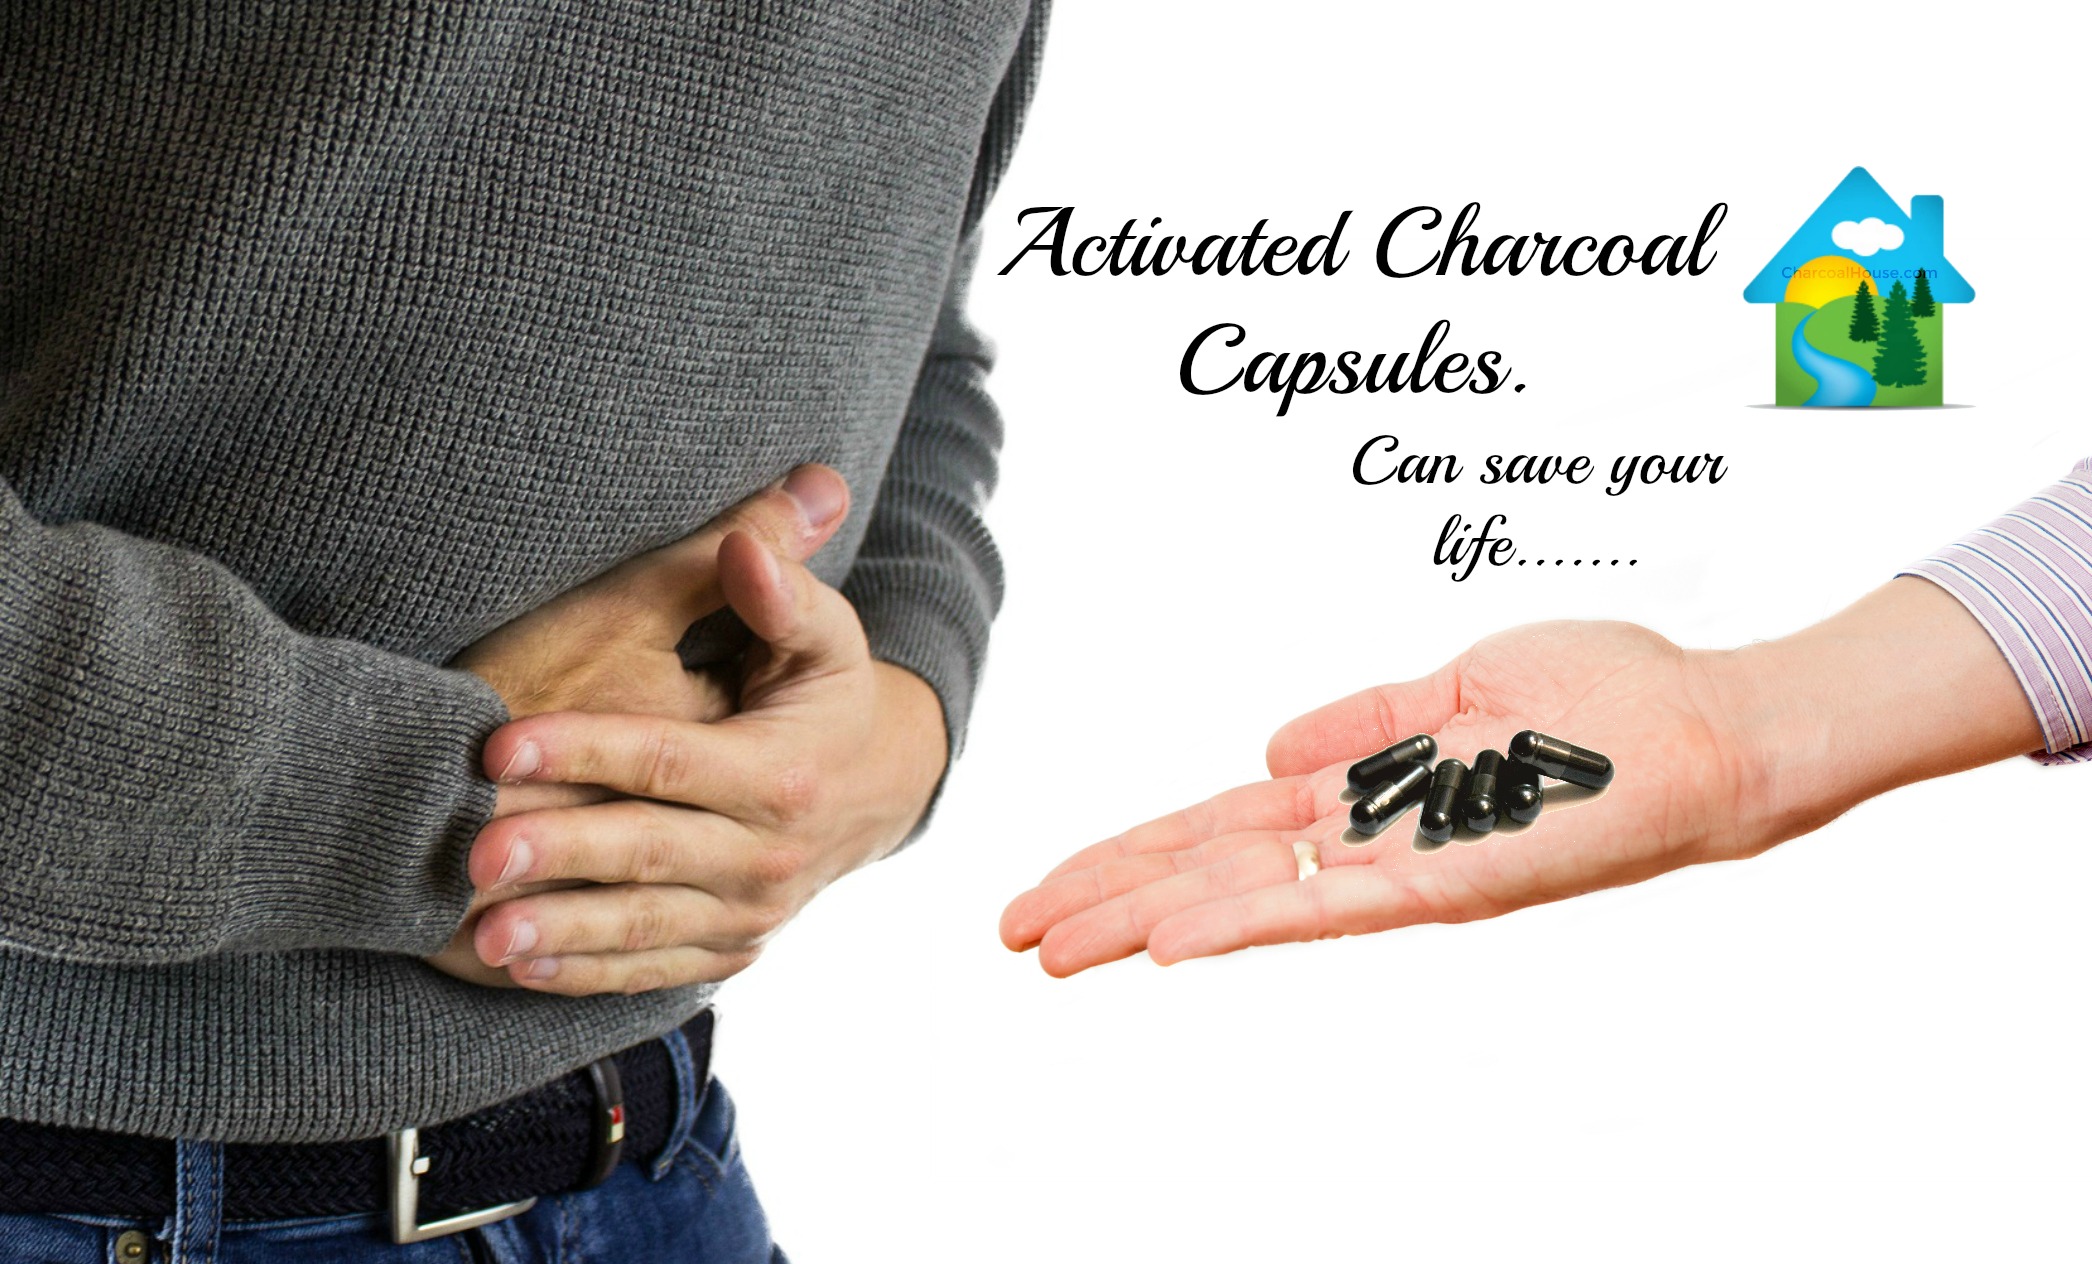 Activated Charcoal Capsules Life Saving header - Activated Charcoal Capsules, Life Saving?